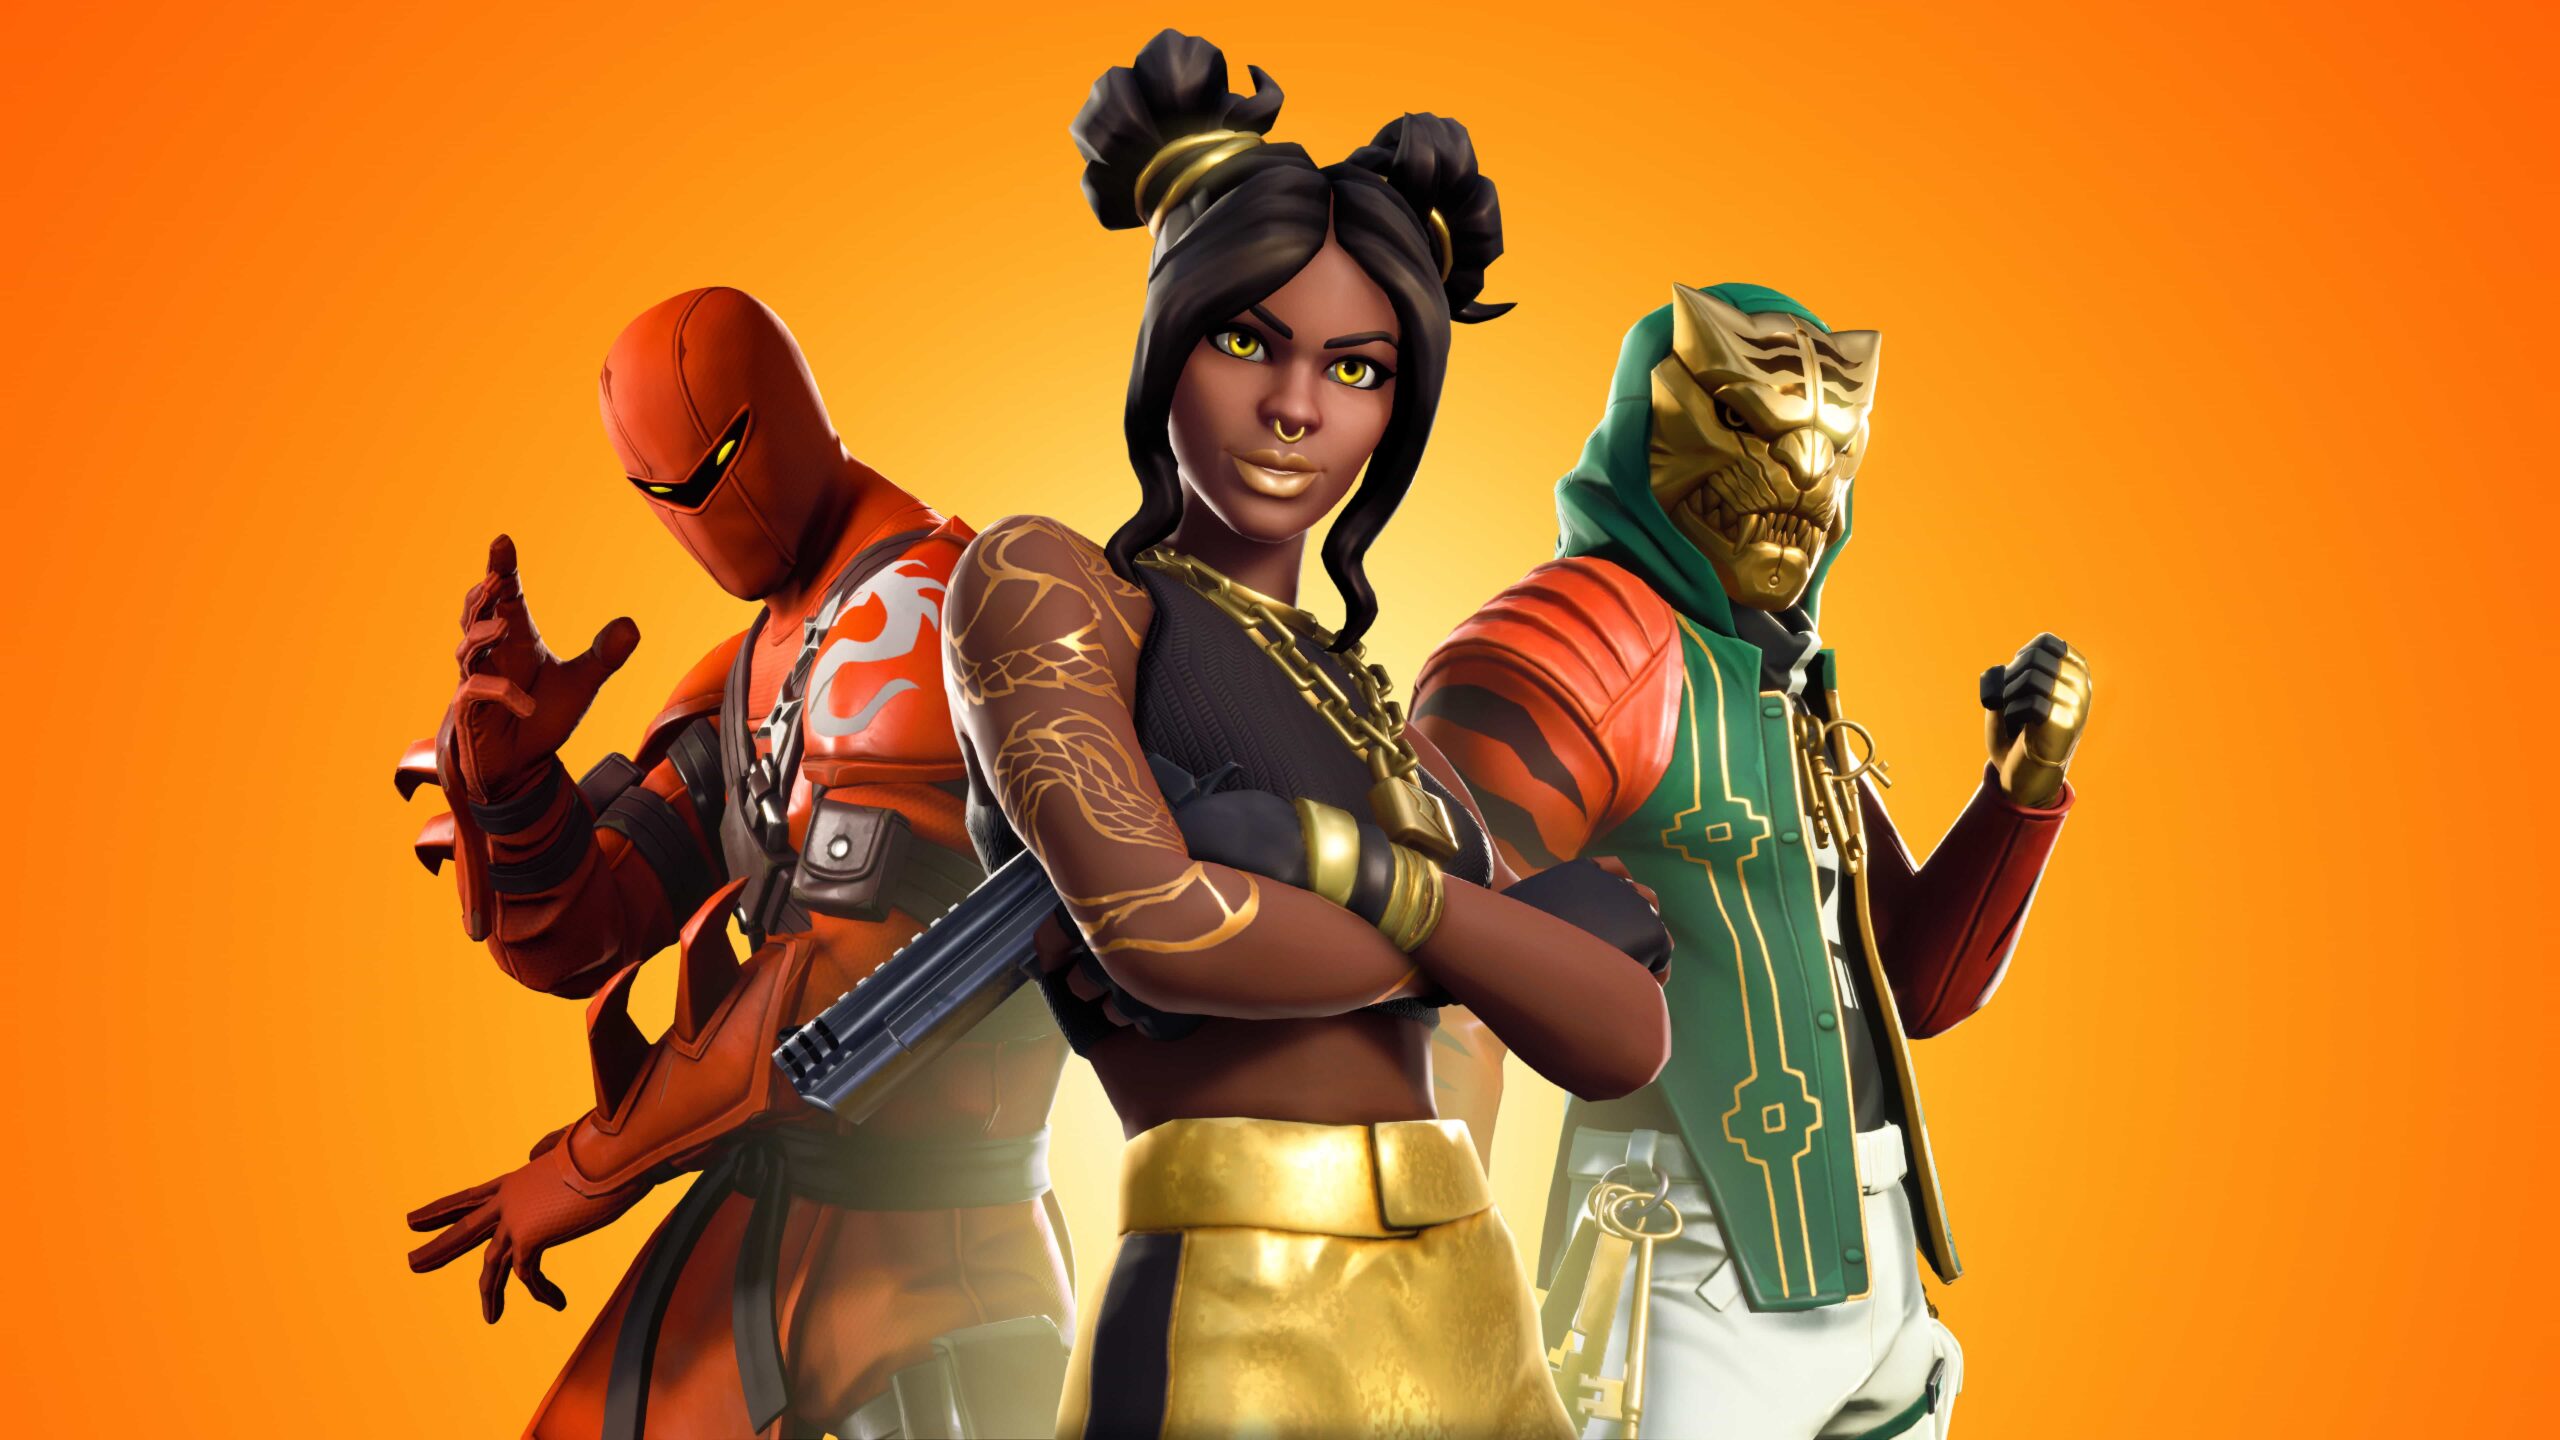 56 Fortnite Desktop Wallpapers HD 4K 5K for PC and Mobile  Download  free images for iPhone Android